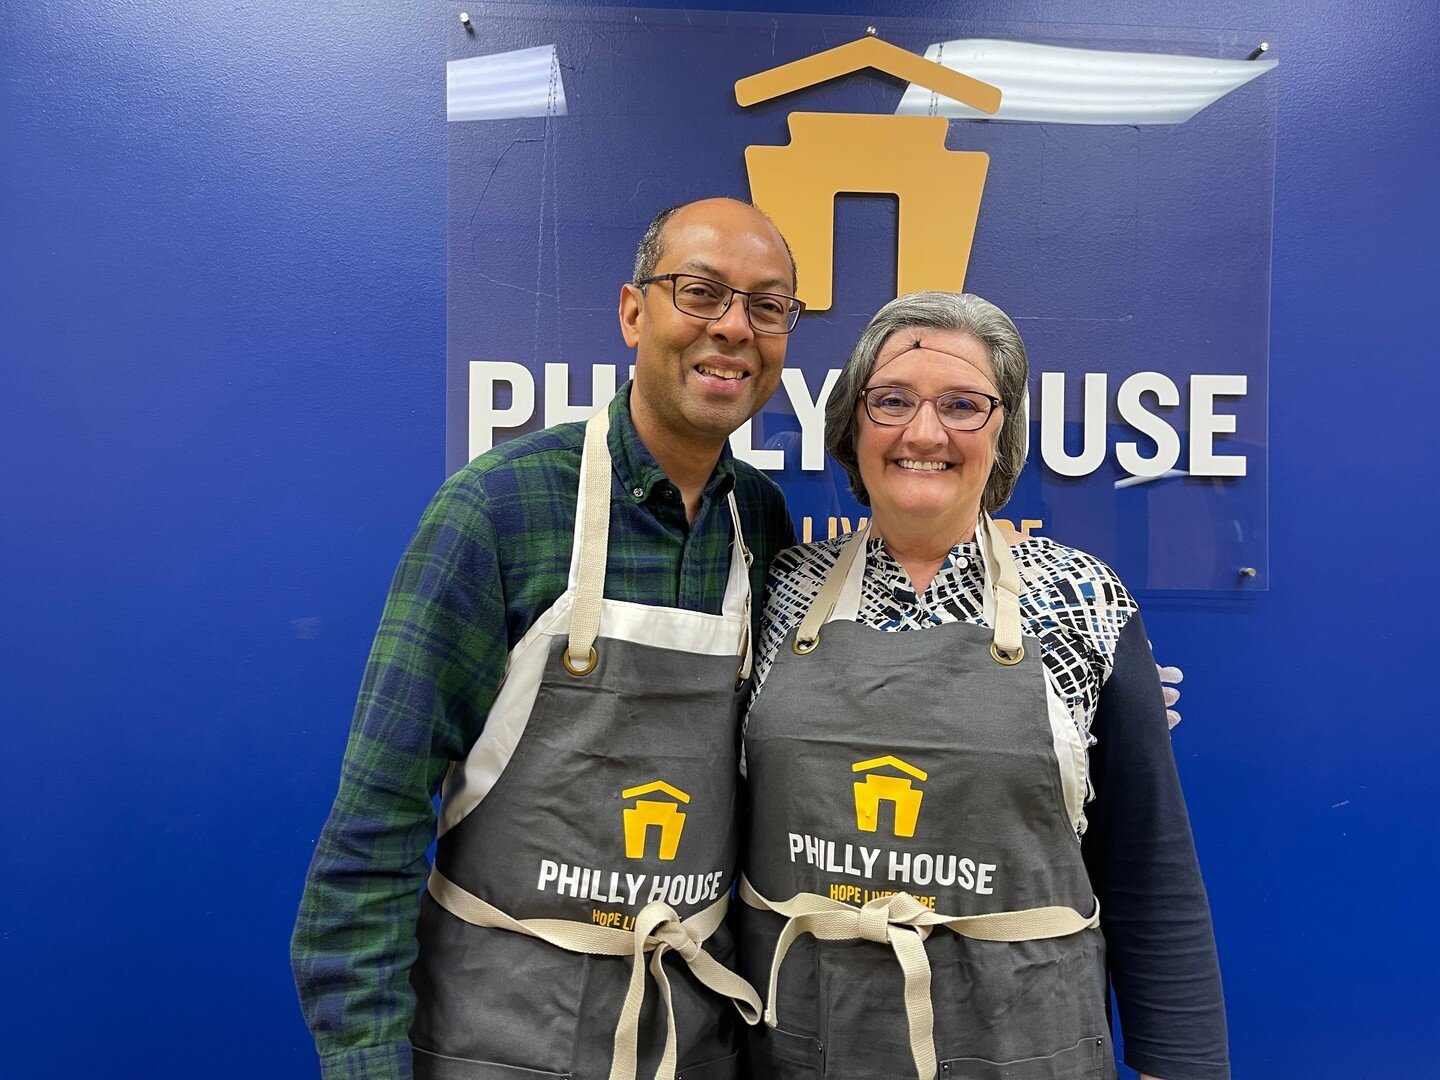 It&rsquo;s all smiles in the Philly House kitchen as our volunteers celebrate our new aprons! Albert and Judy, pictured above, have been volunteering at Philly House for over 10 years. We are thankful for their continued support!

You can learn more 